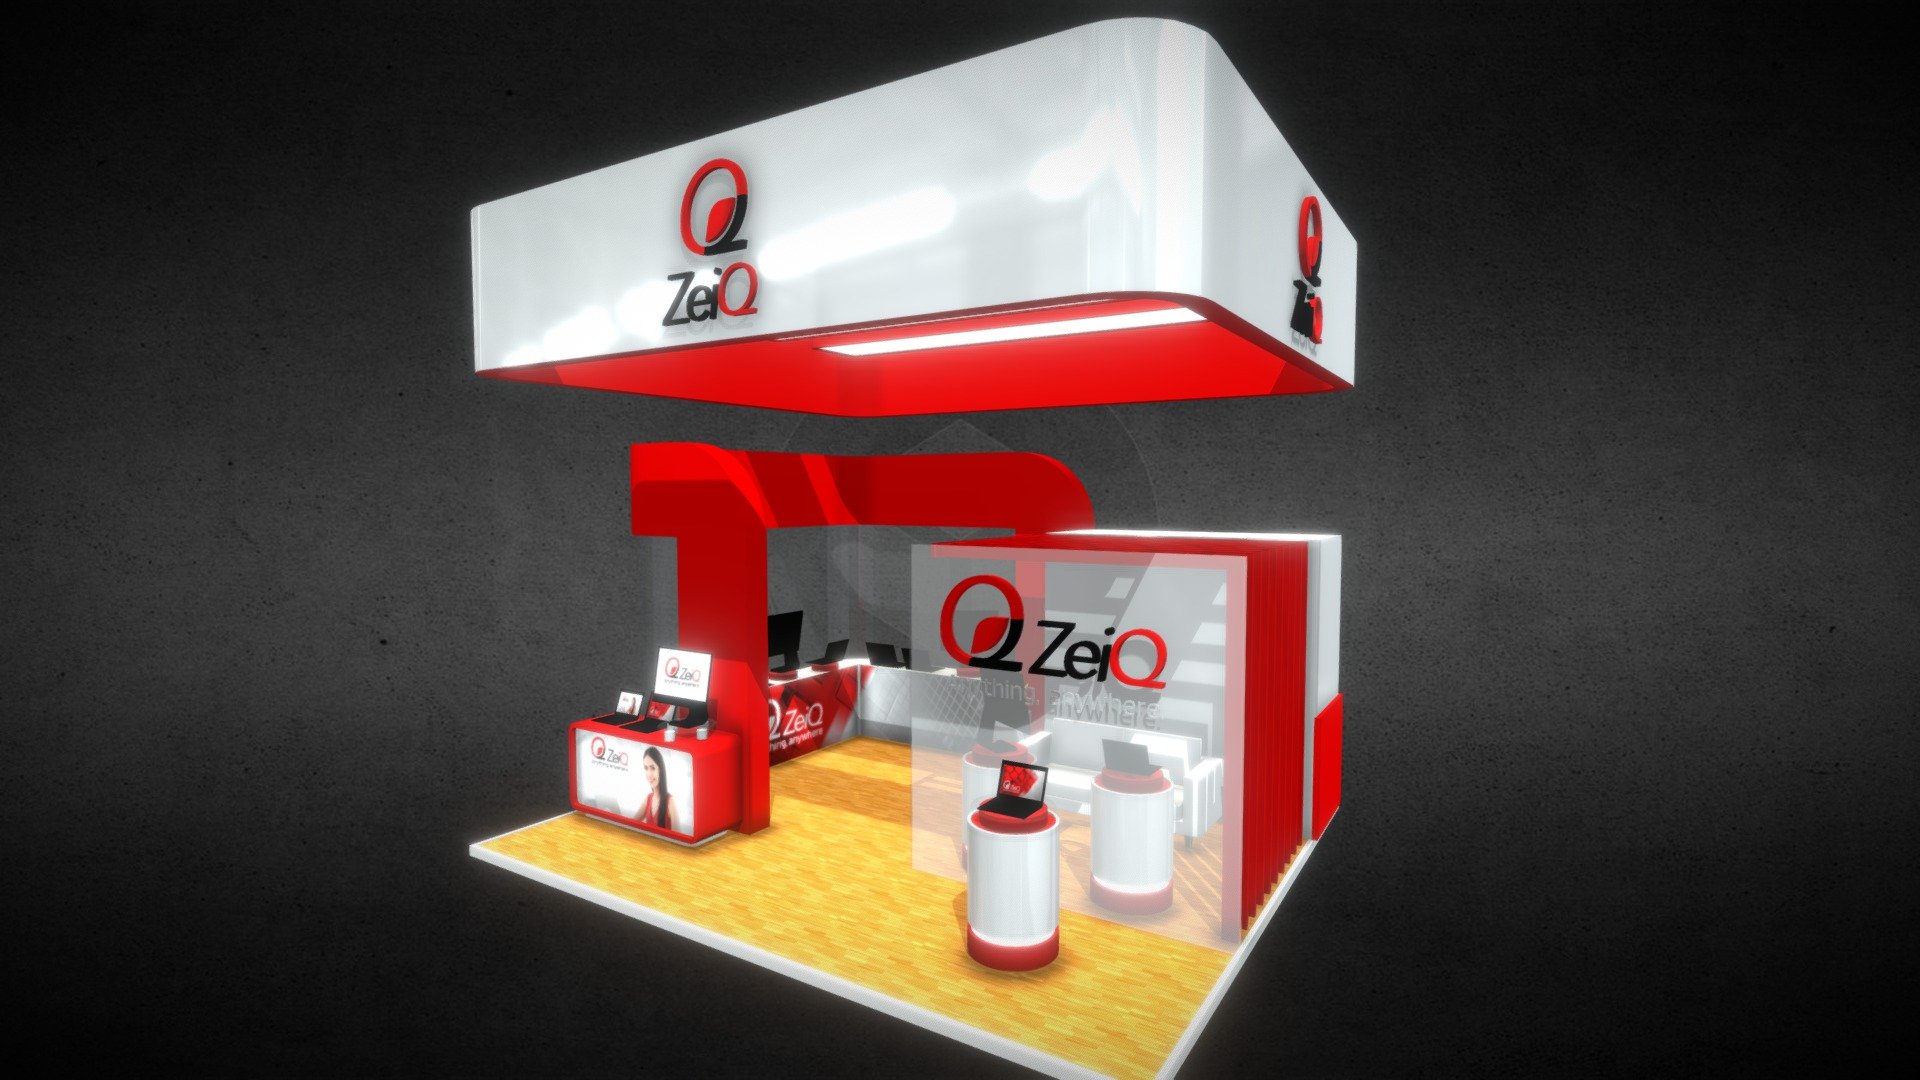 Exhibition stand concept. Modeled in 3ds Max - Zeiq Stand - 3D model by trilobite3d 3d model